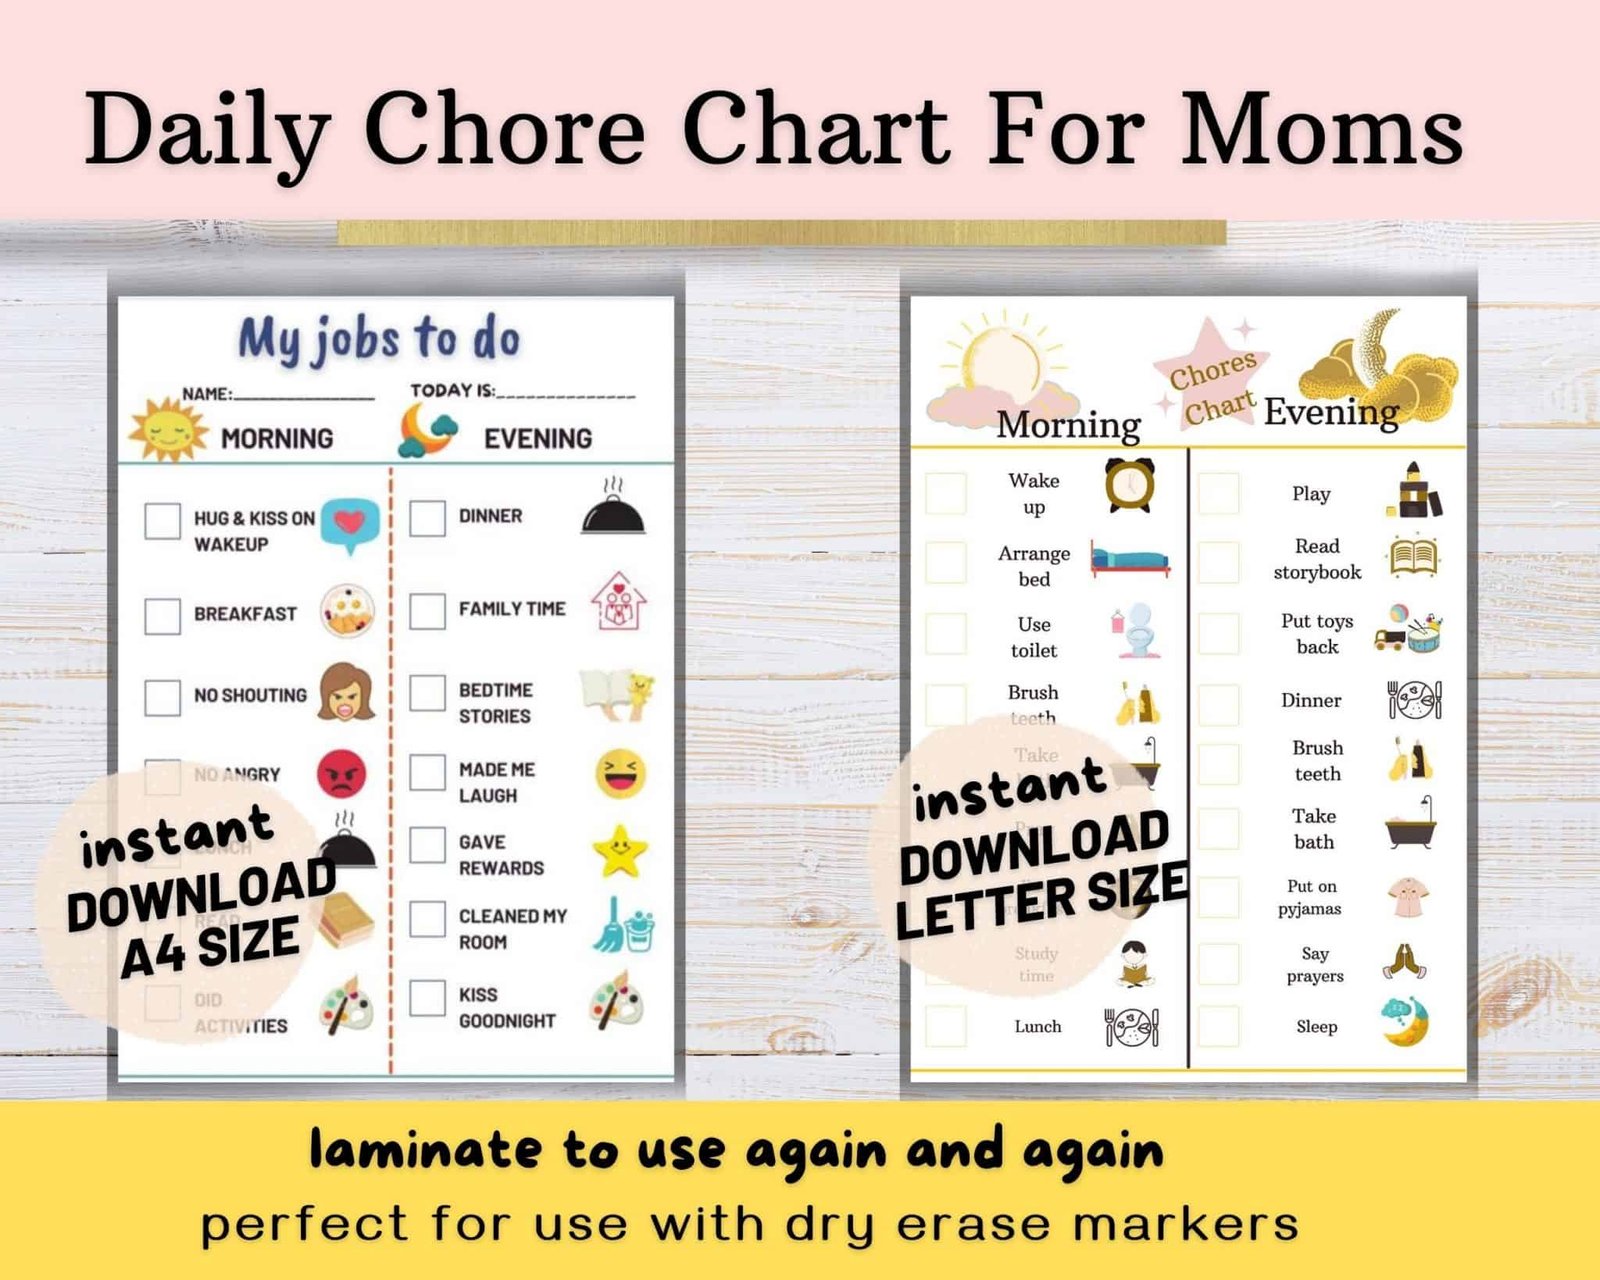 Daily Chore Chart For Moms Printable Sharing Our Experiences